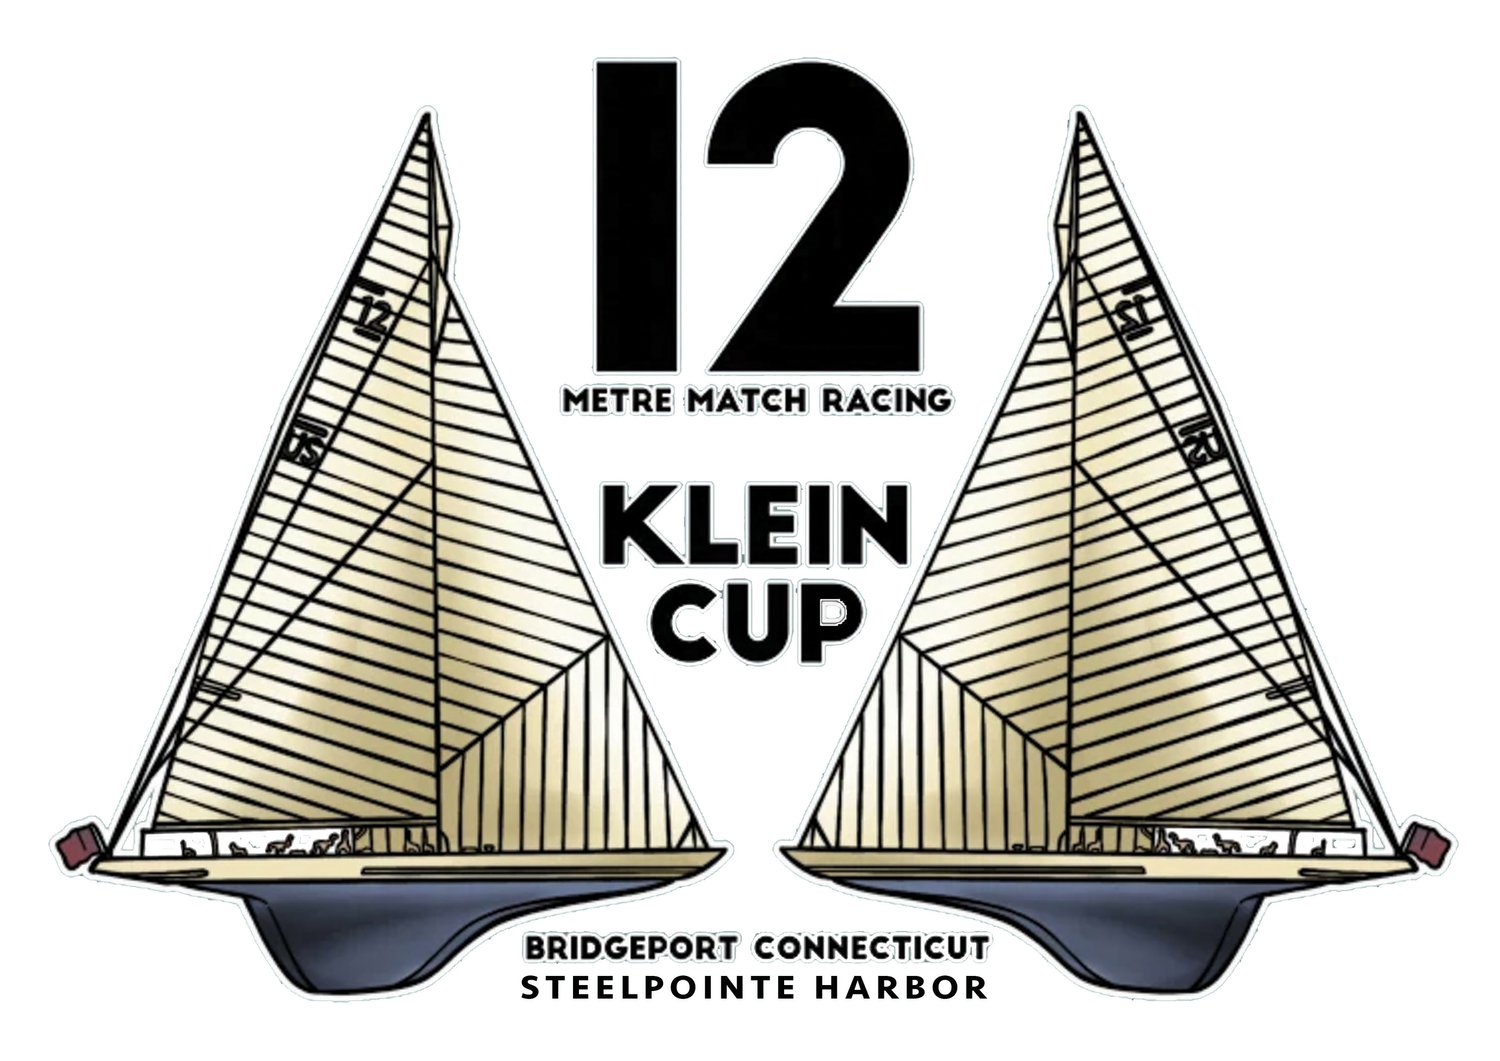 The Klein Cup